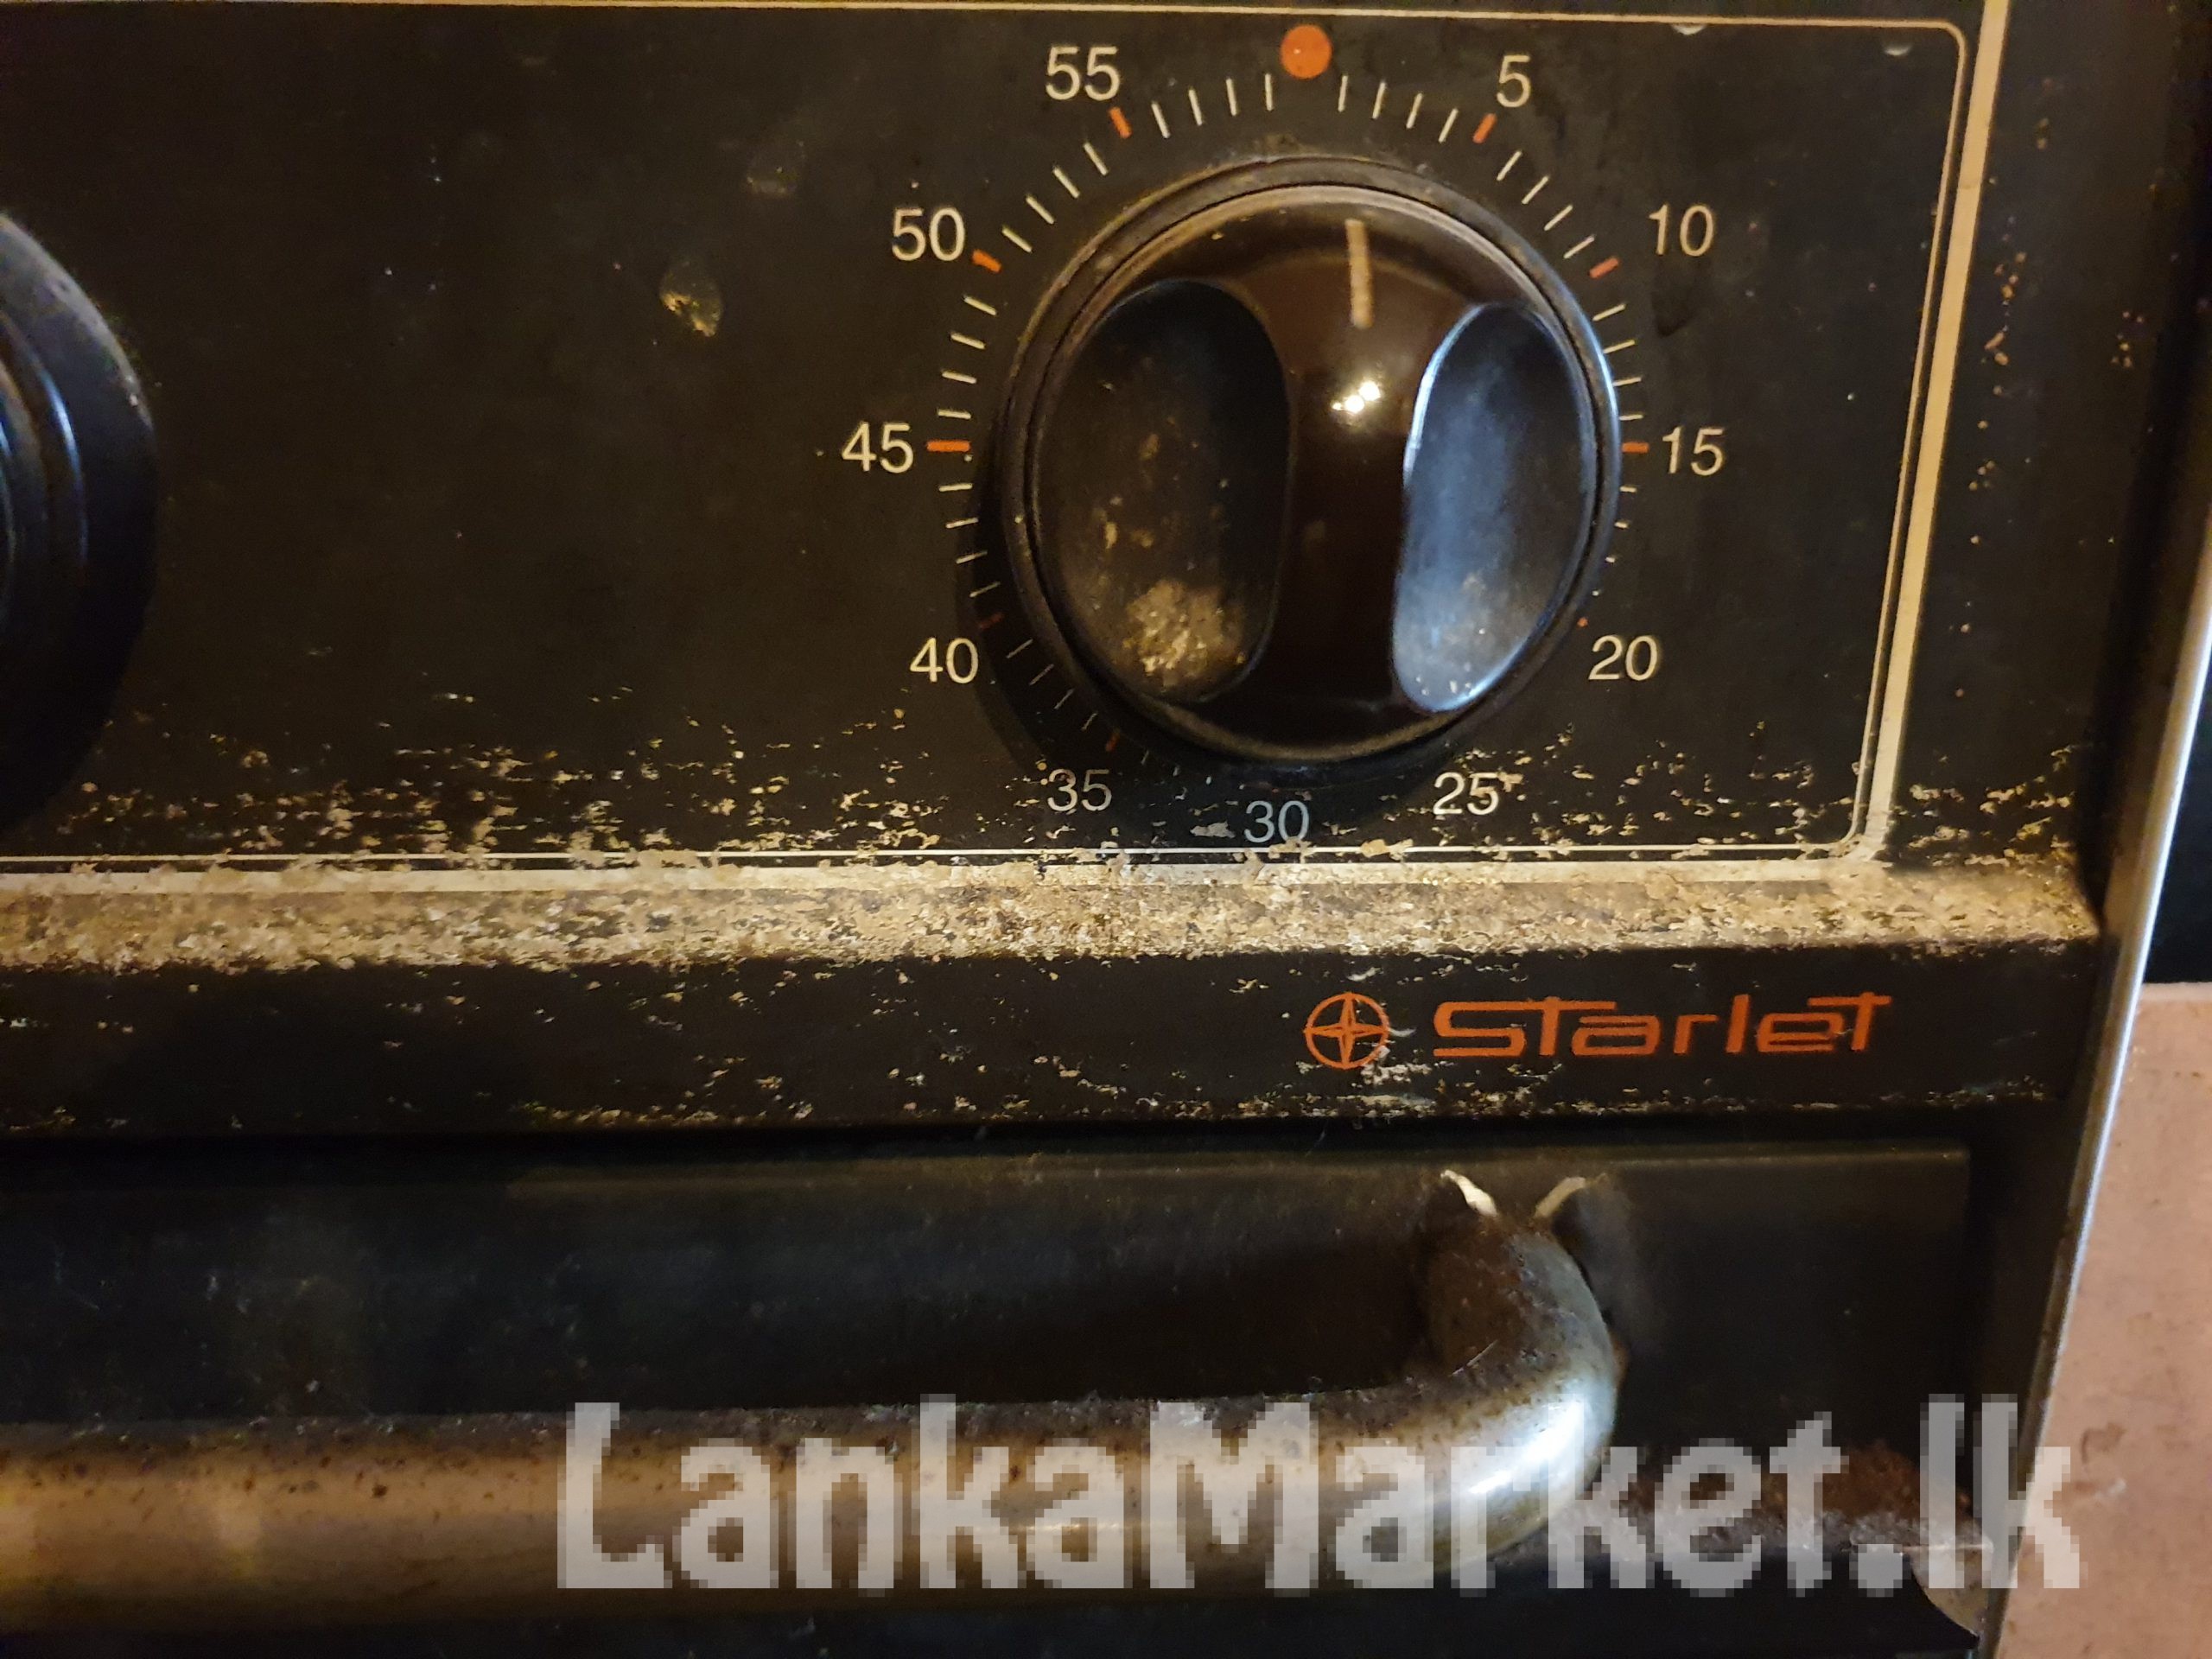 Electric and gas oven